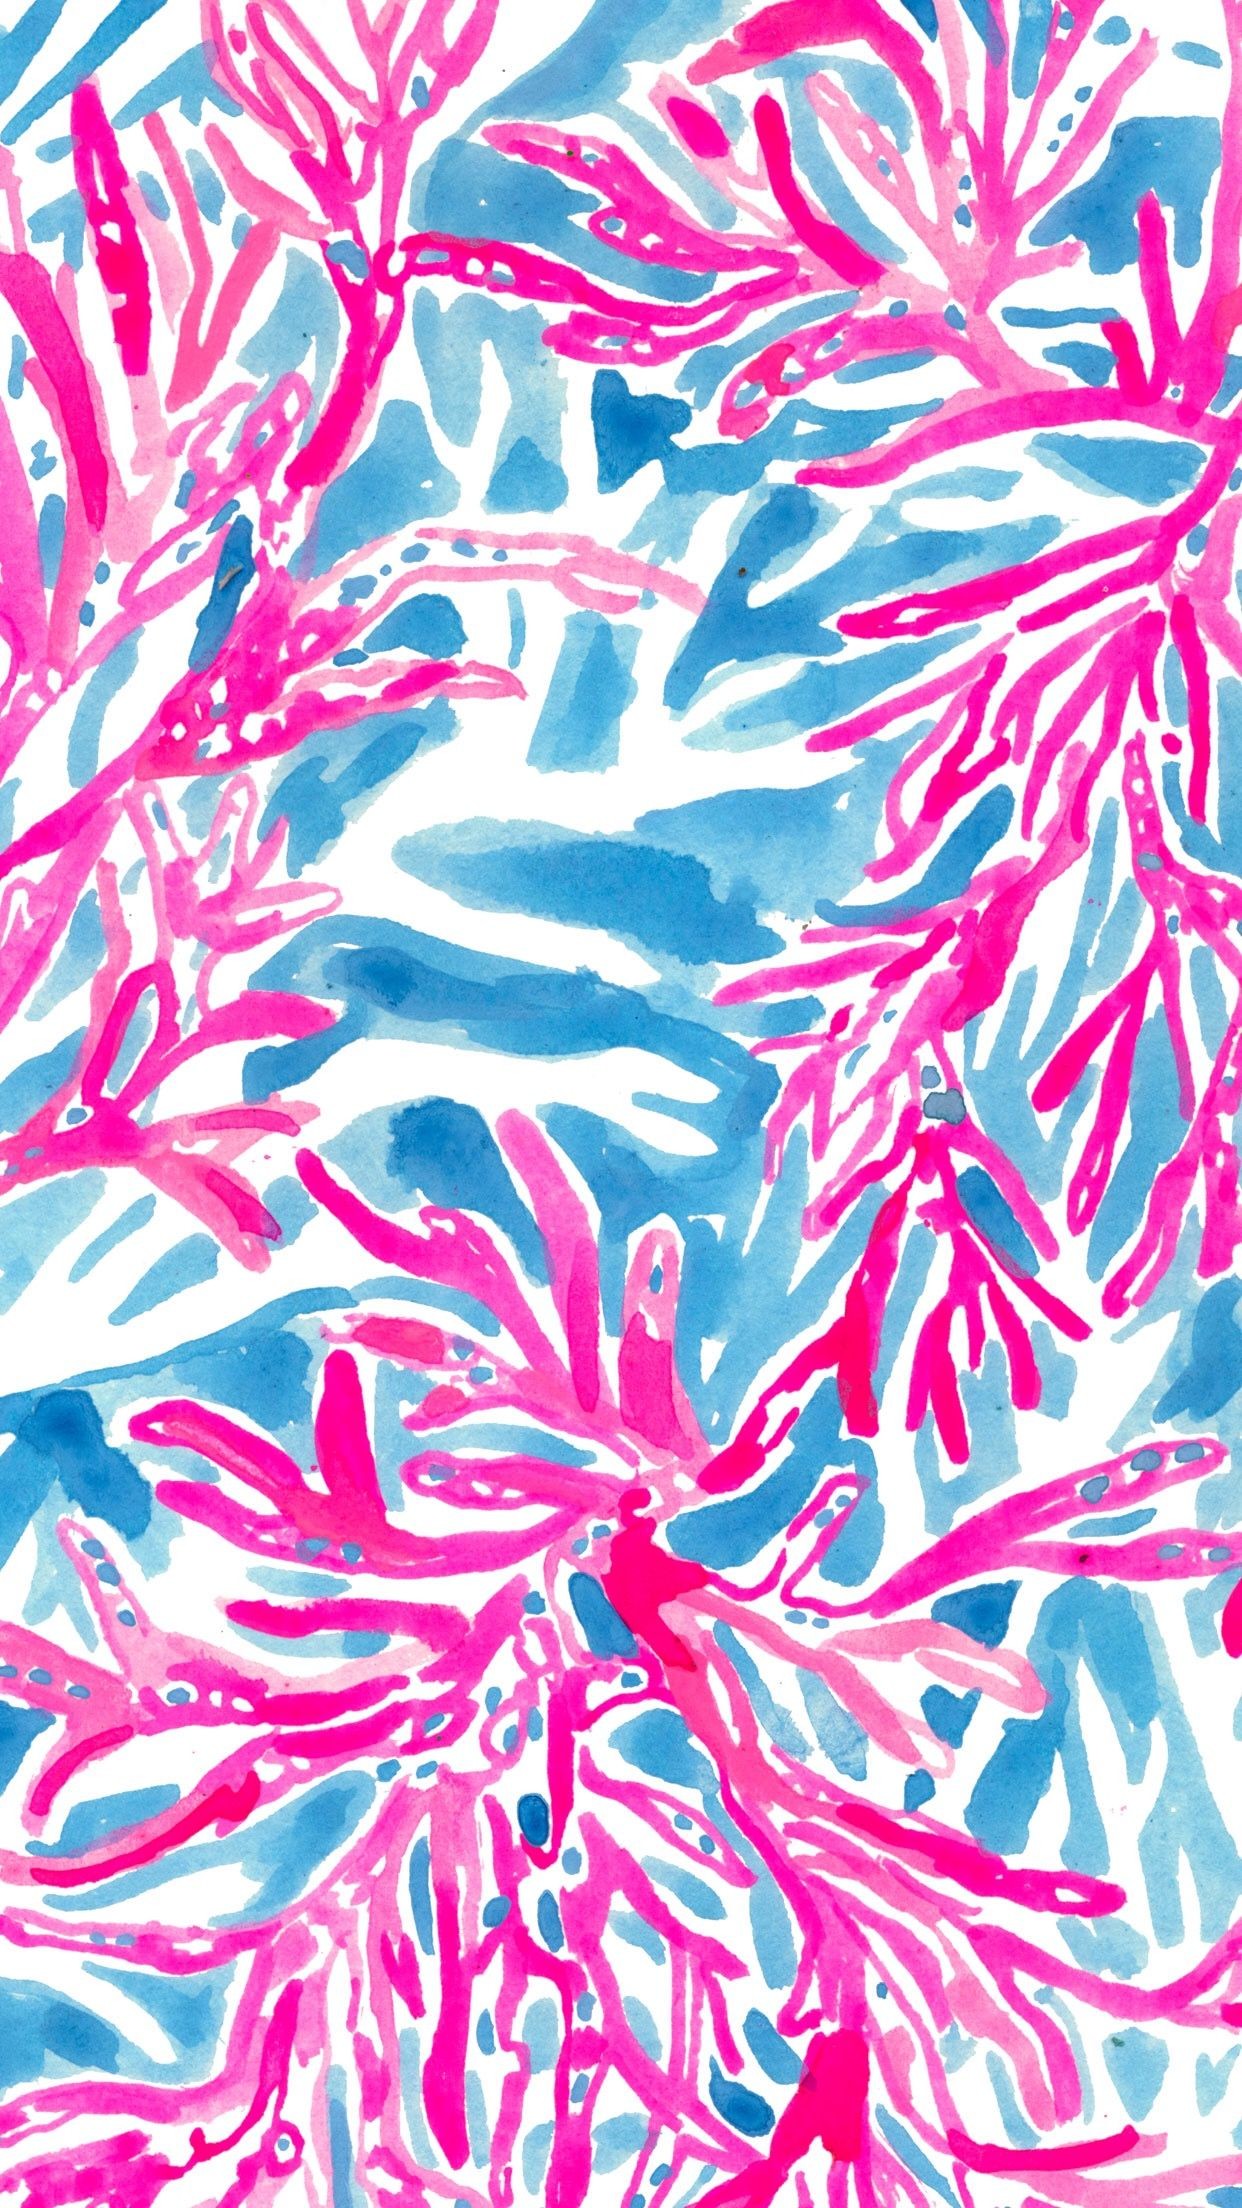 1242x2208 Lilly Pulitzer Lilly Pulitzer Iphone Wallpaper, Lilly Pulitzer Patterns, Lilly  Pulitzer Prints, Summer